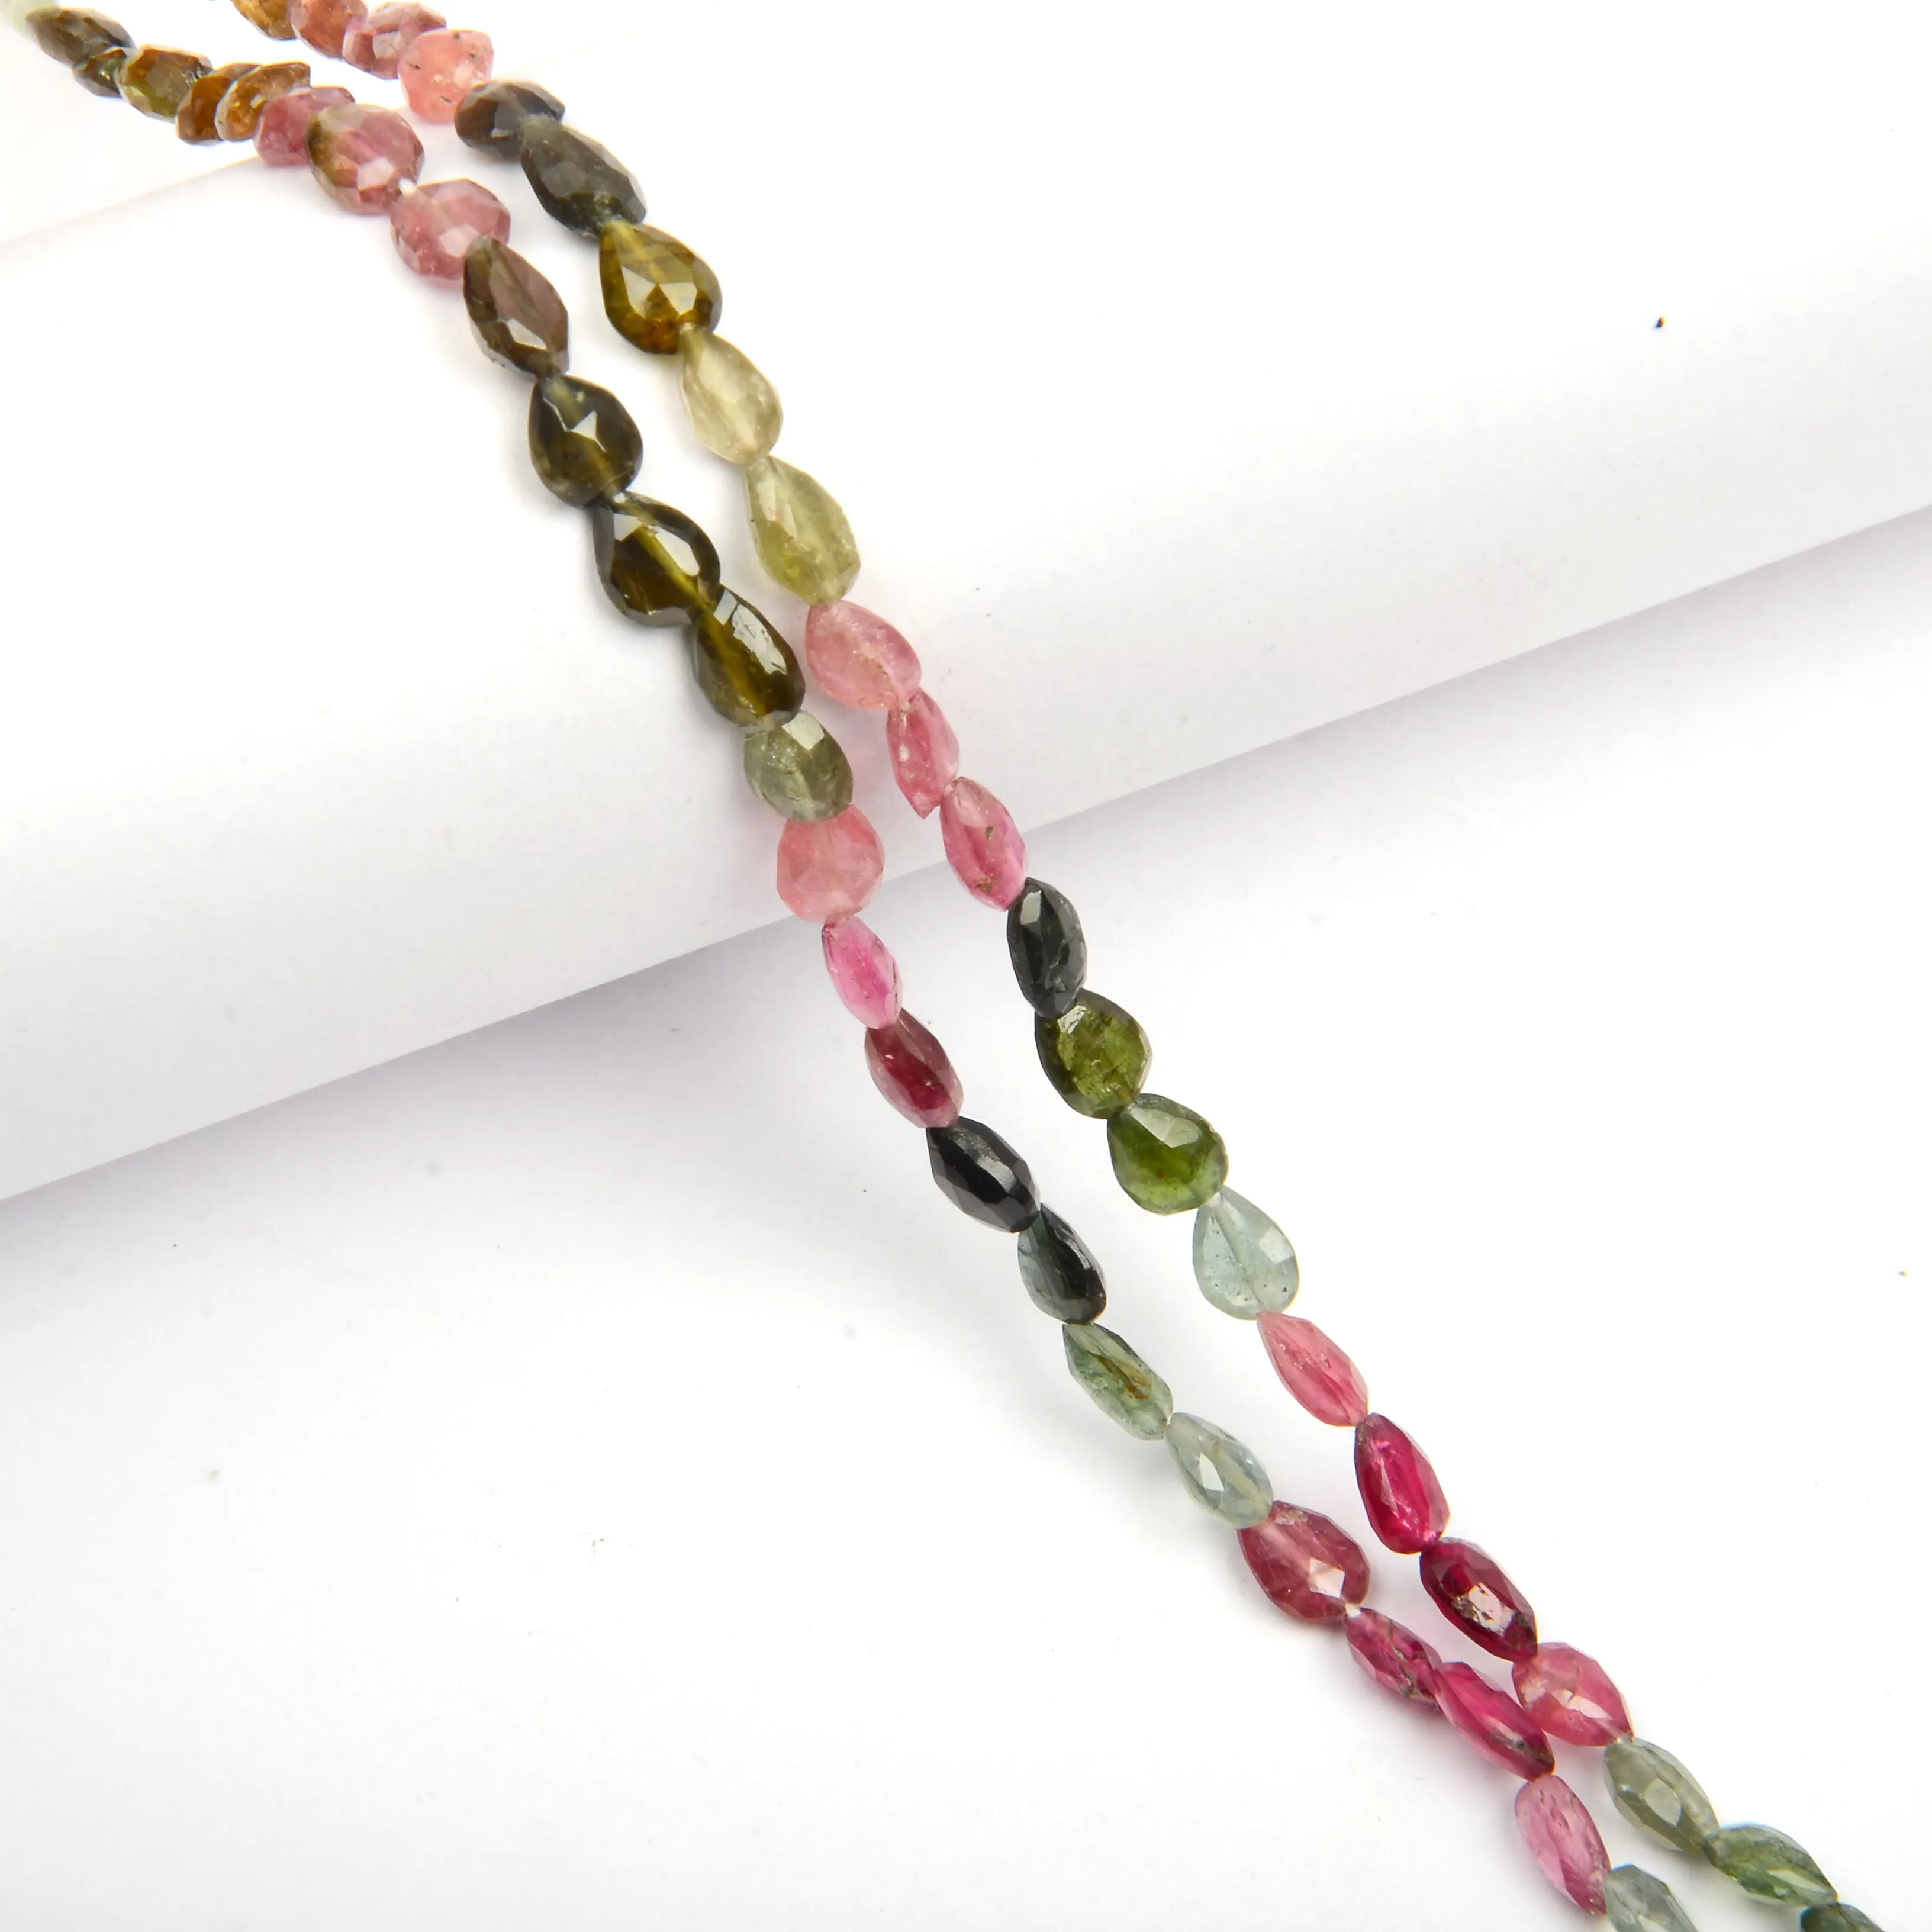 Natural Tourmaline Gemstone Beads Faceted Pear Shape Straight drill Beads Wholesale Drilled Jewelry Making Beads